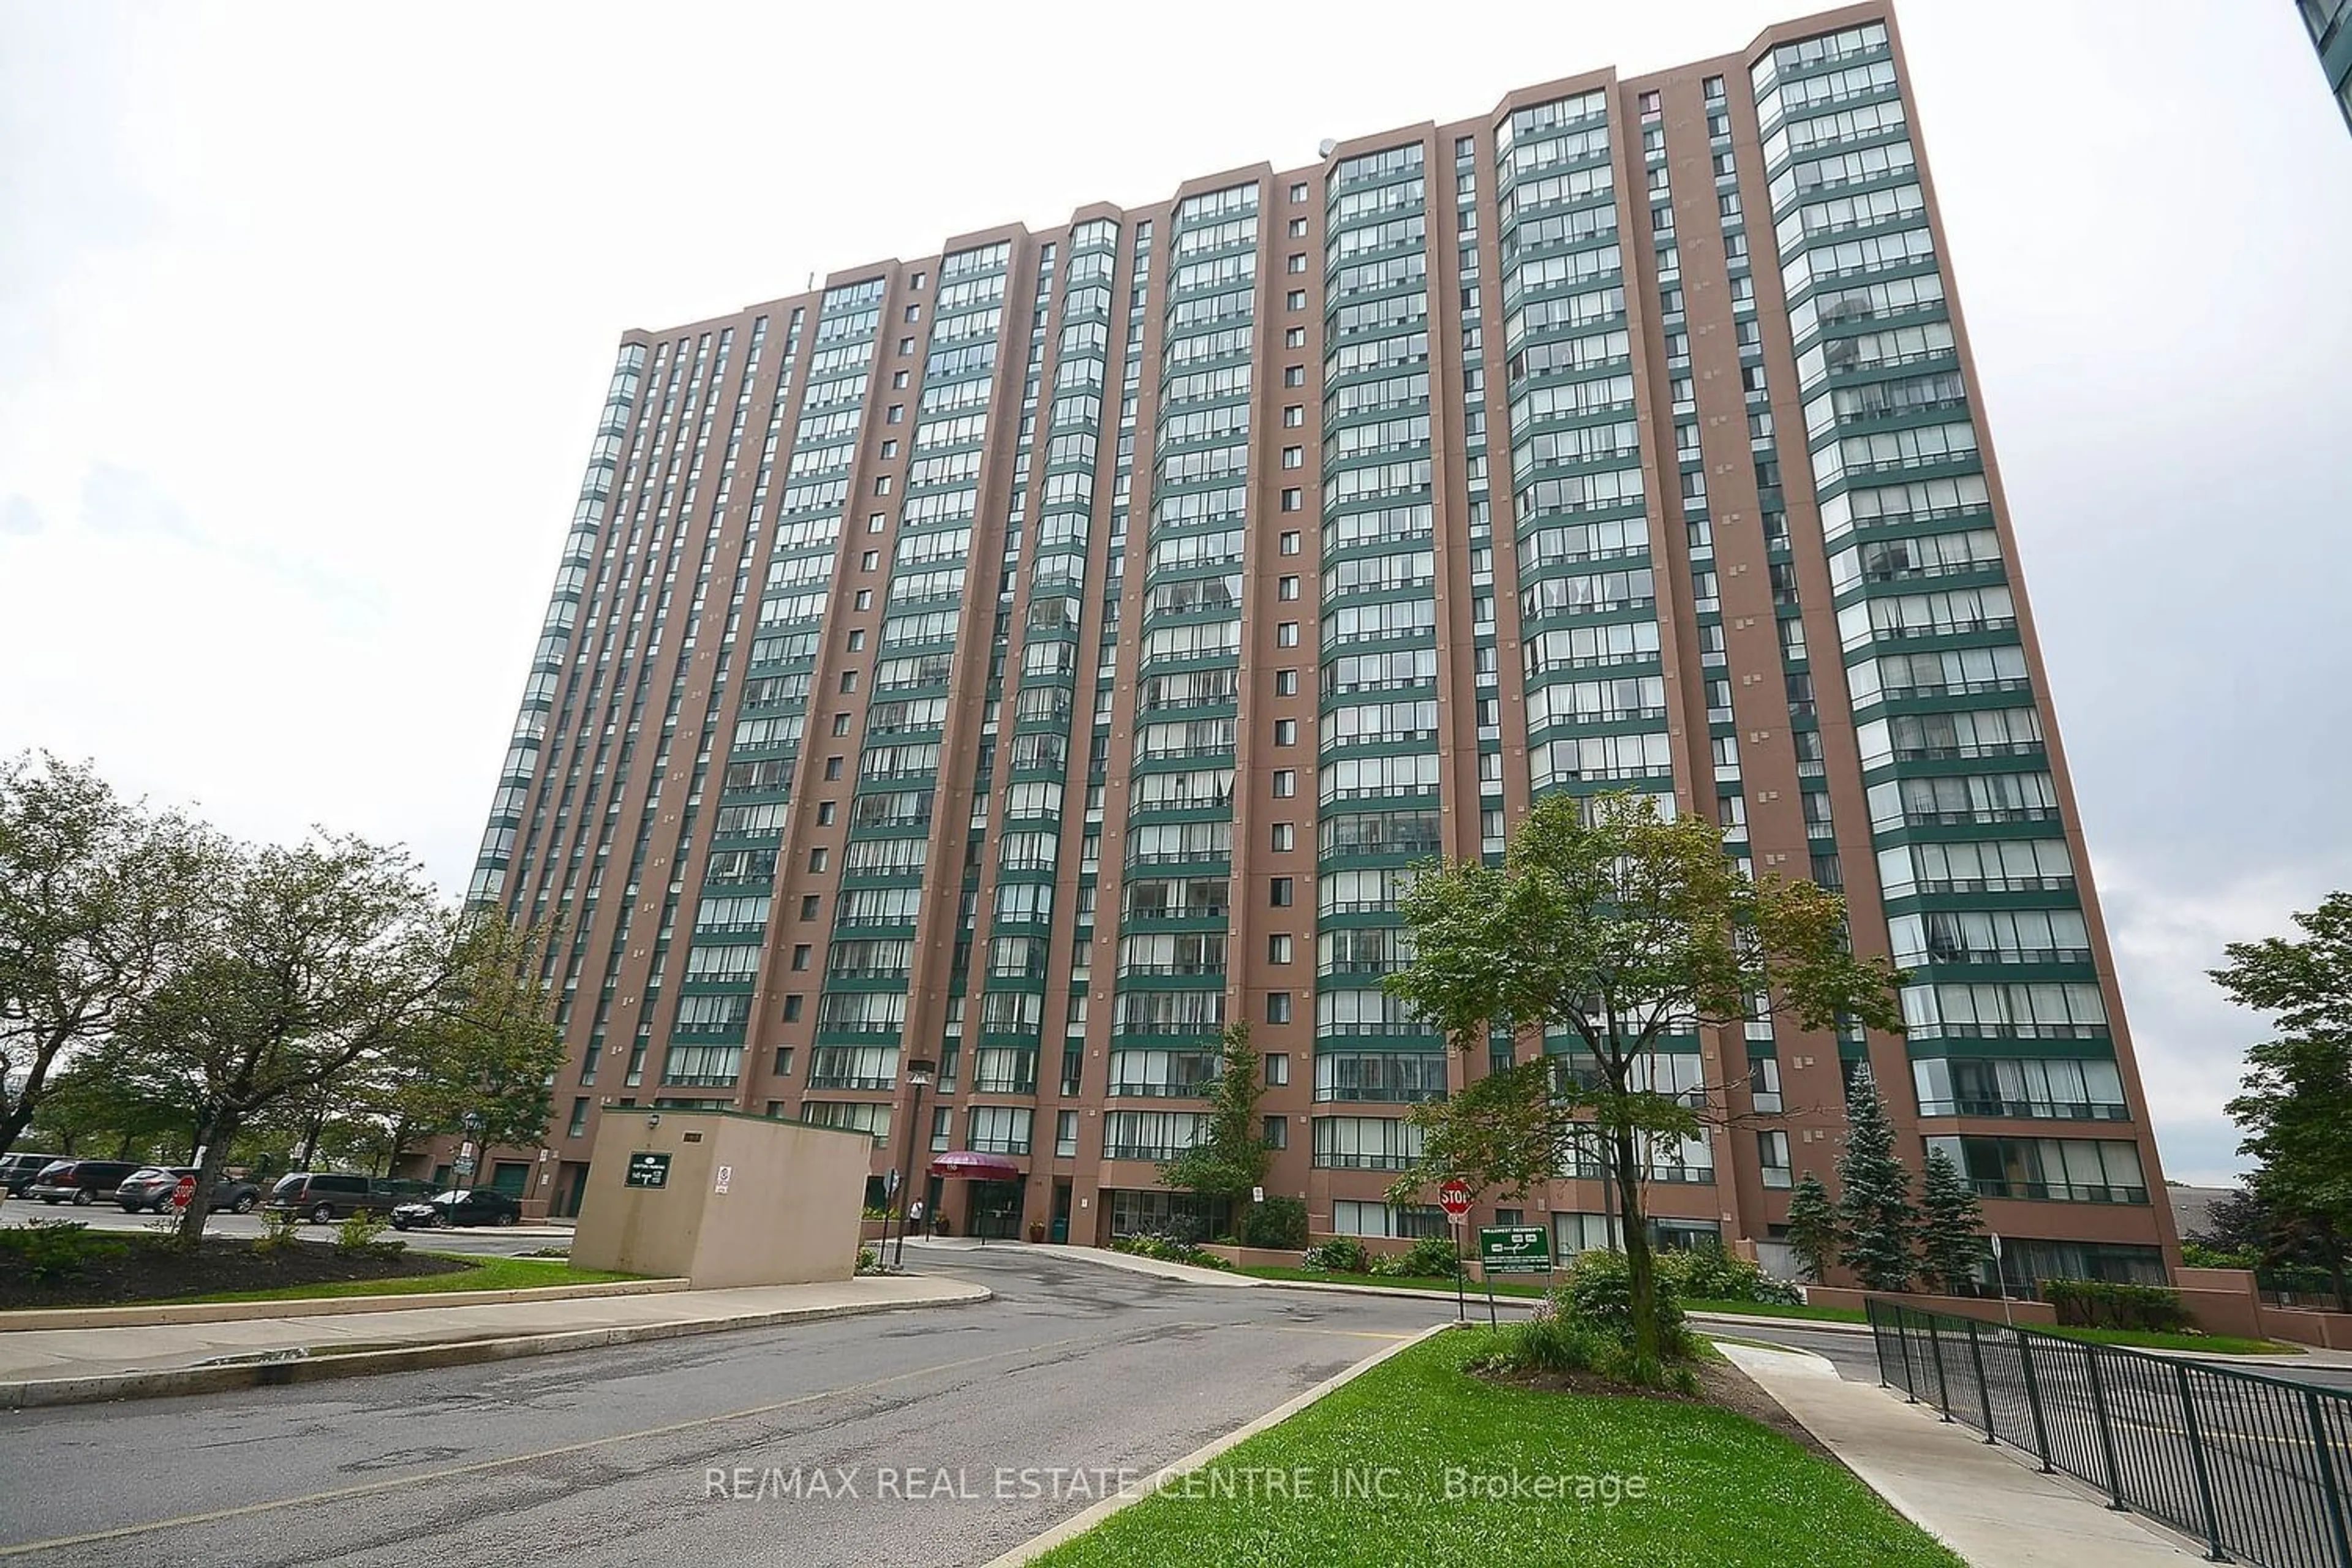 A pic from exterior of the house or condo for 155 Hillcrest Ave #307, Mississauga Ontario L5B 3Z2